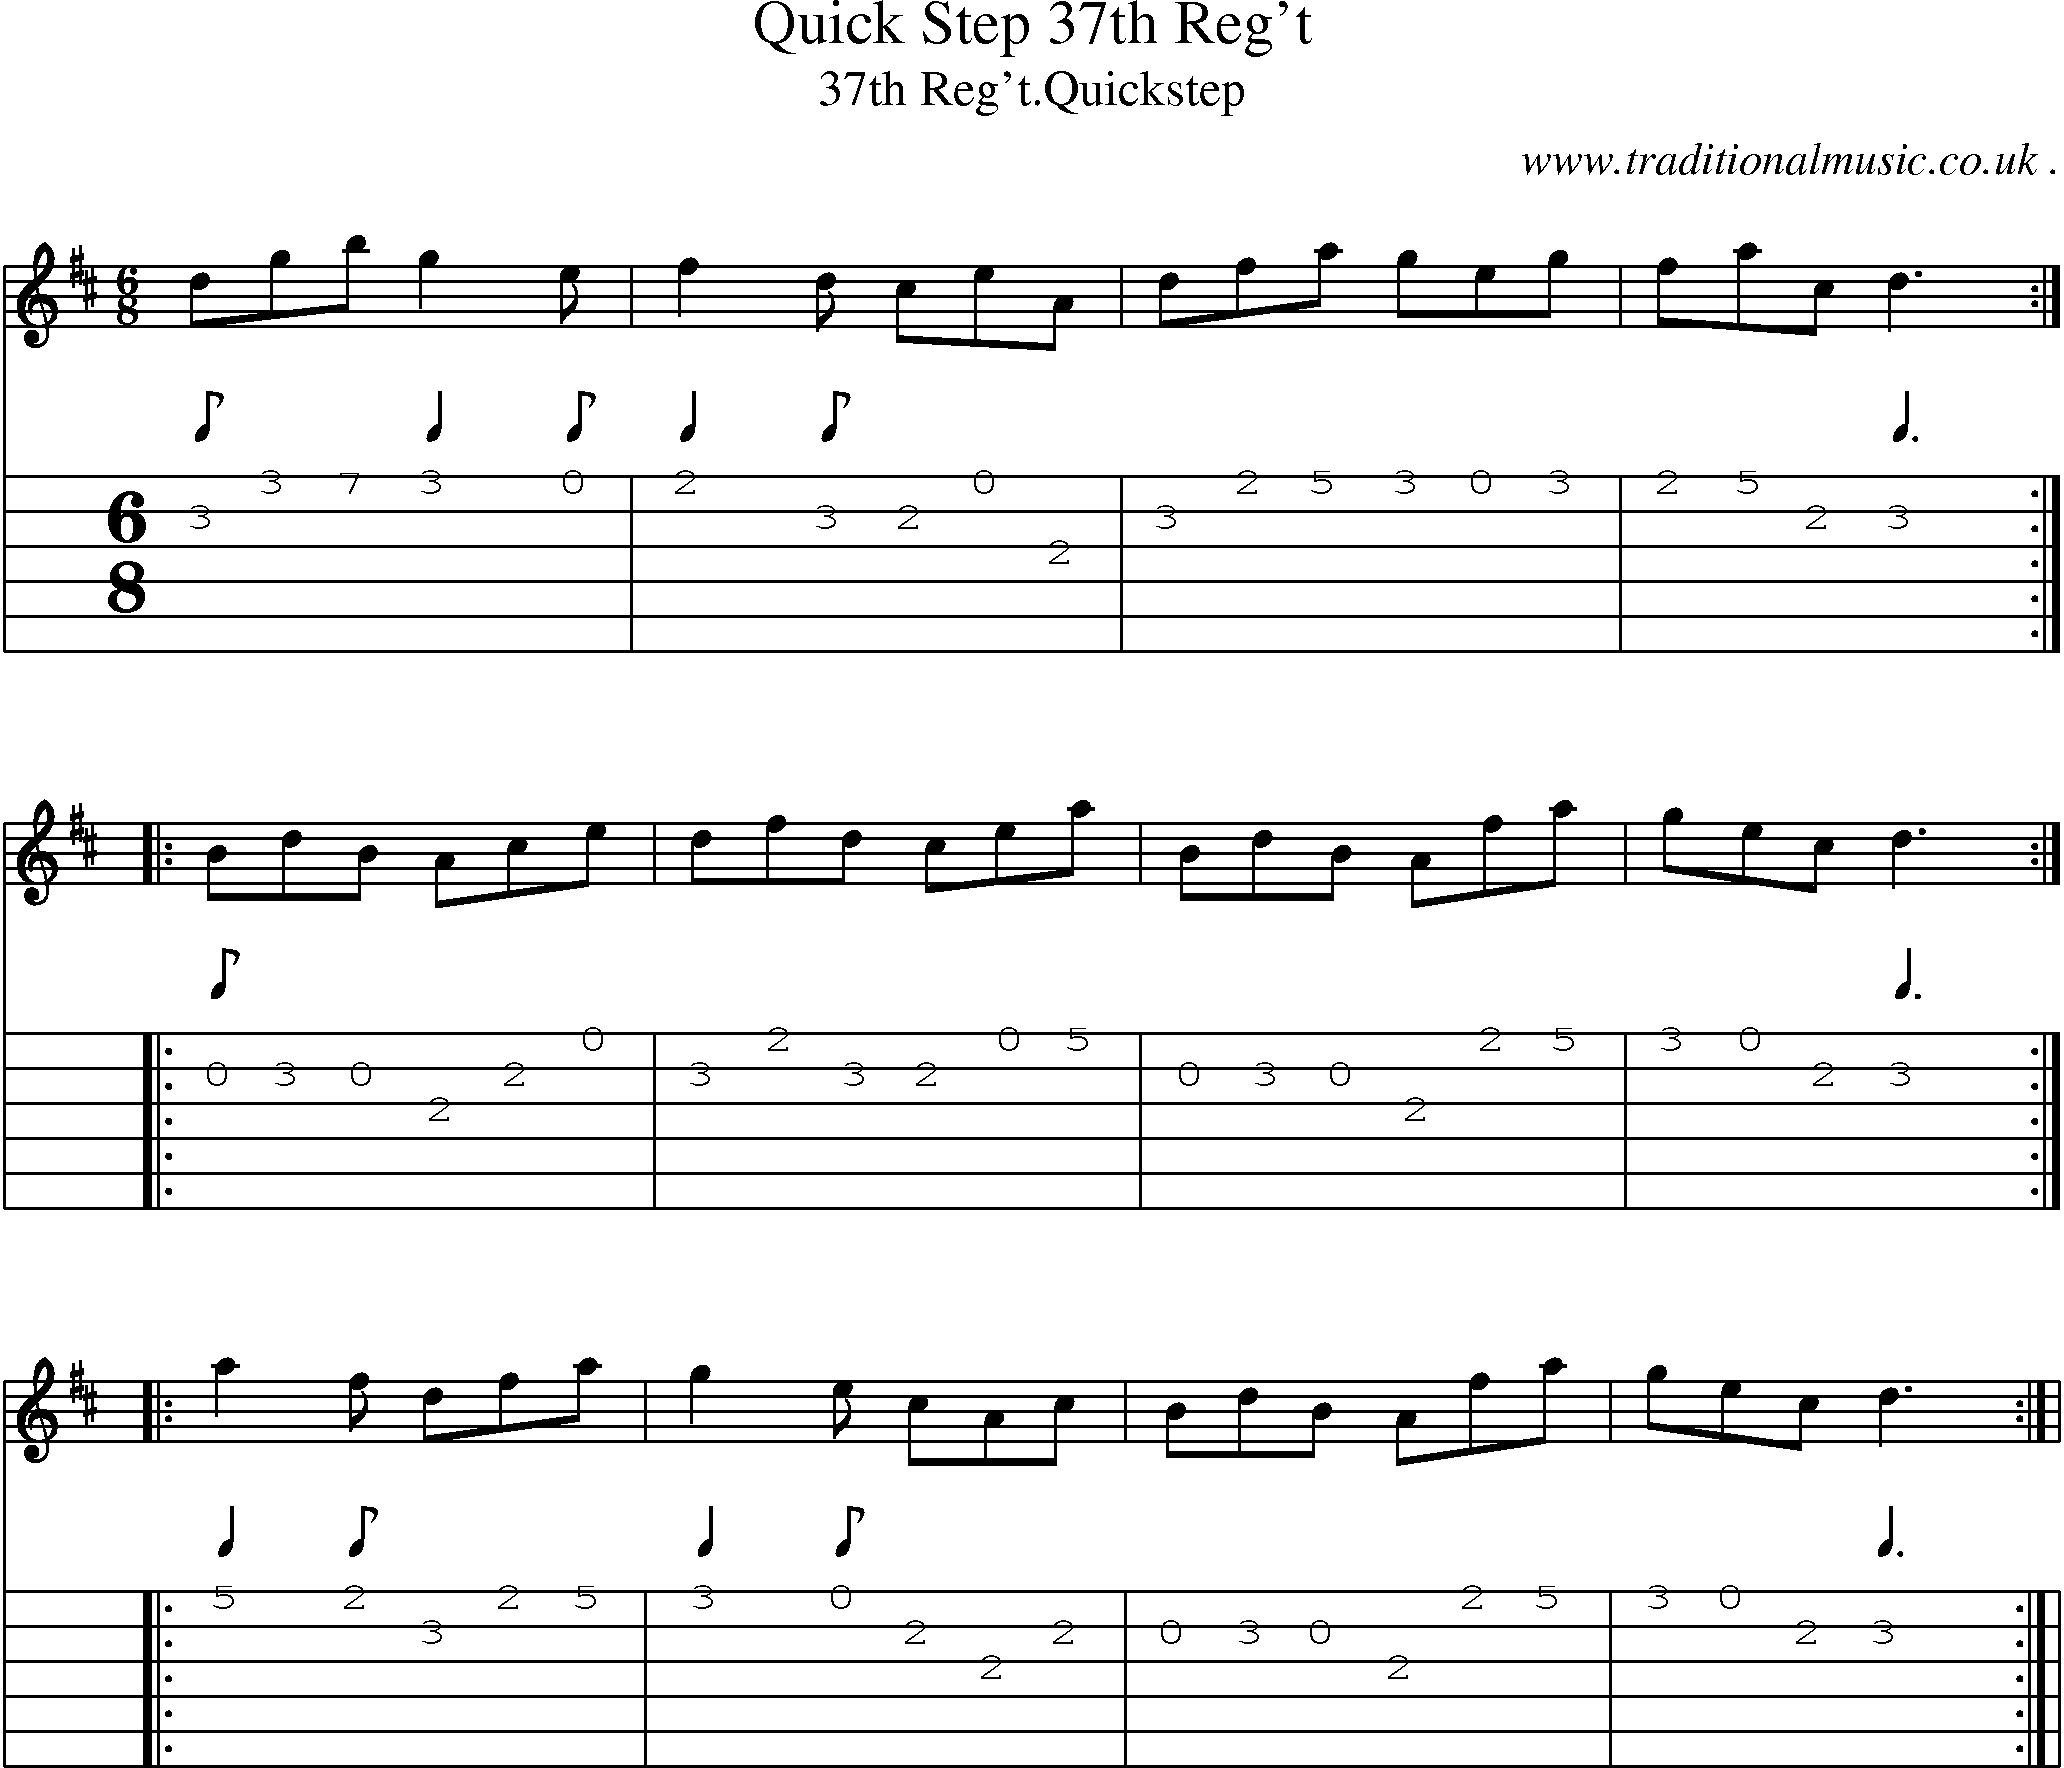 Sheet-Music and Guitar Tabs for Quick Step 37th Reg